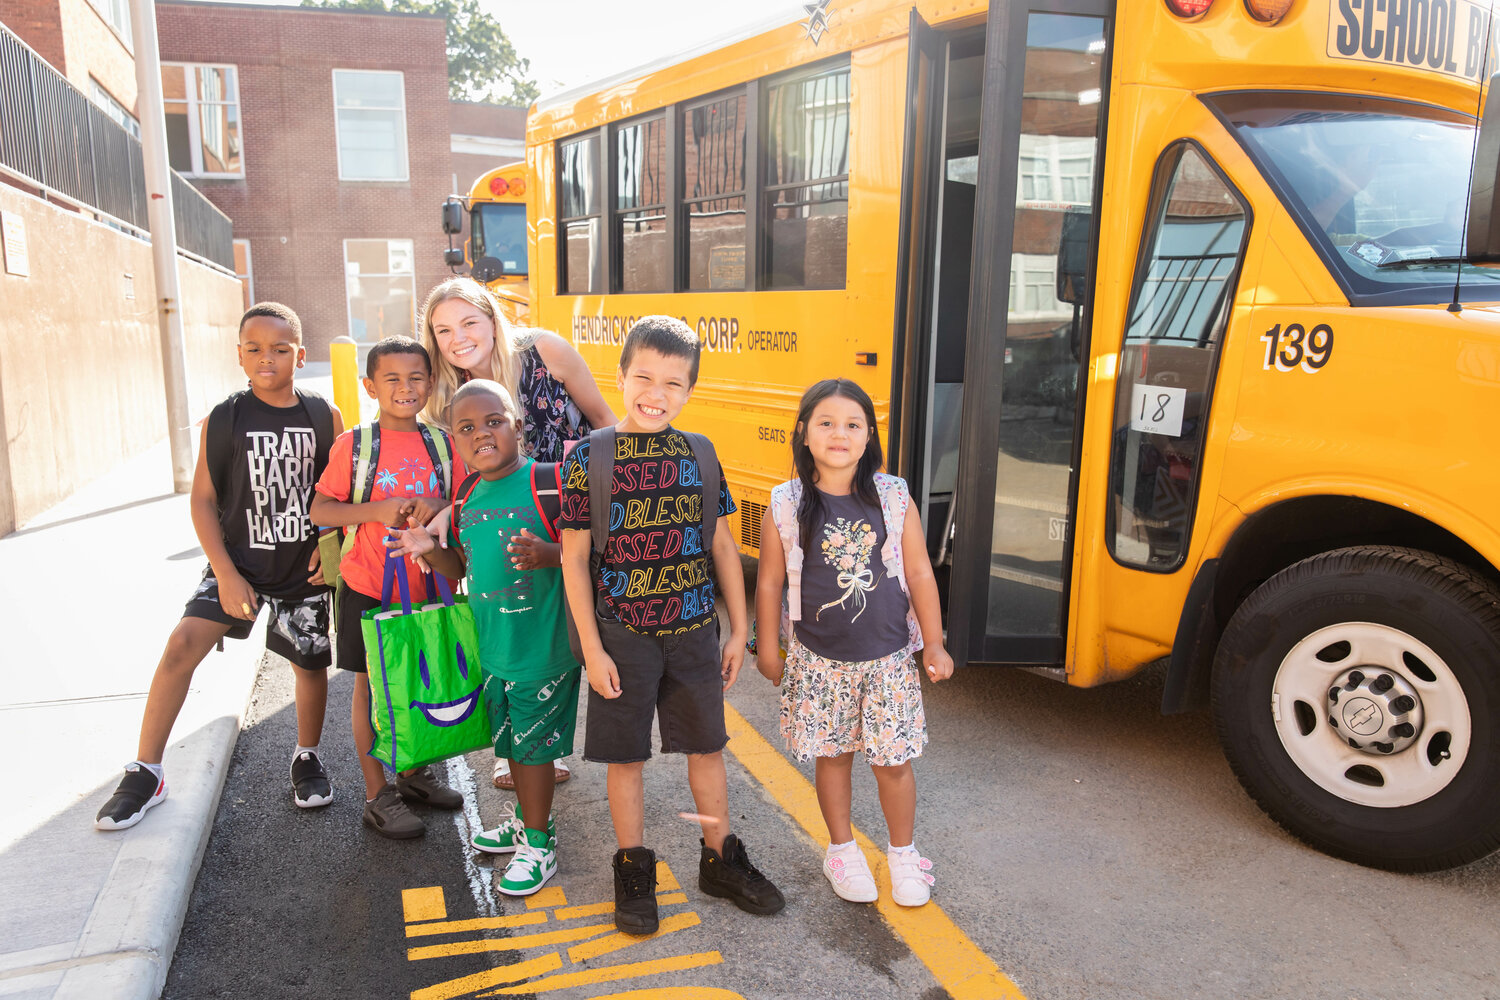 Students were met by friendly faculty and staff as soon as they stepped off the bus. The school district works hard to ensure their students come back to a safe and welcoming environment.